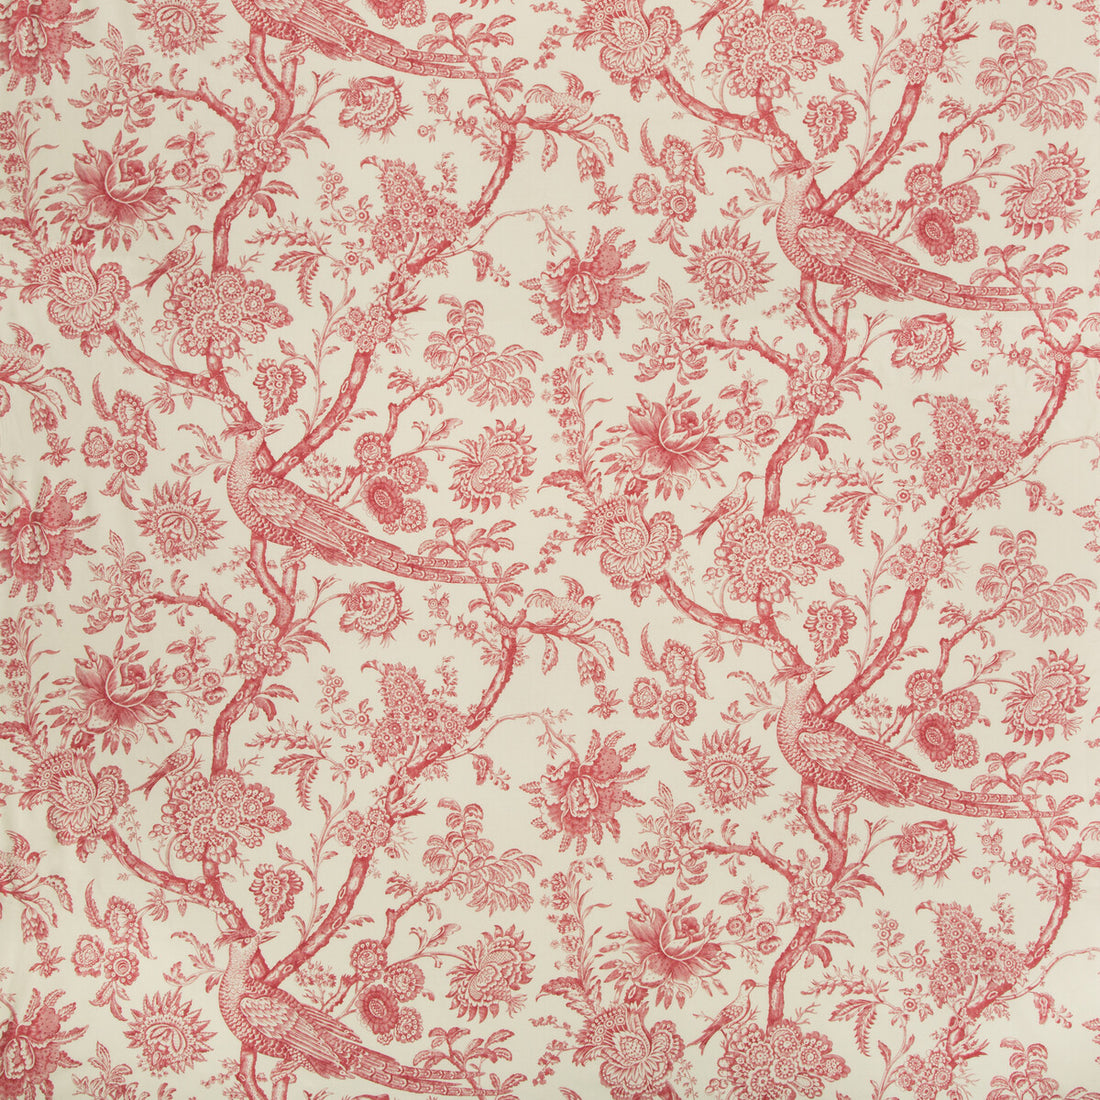 Cevennes Print fabric in red color - pattern 8018122.19.0 - by Brunschwig &amp; Fils in the Cevennes collection